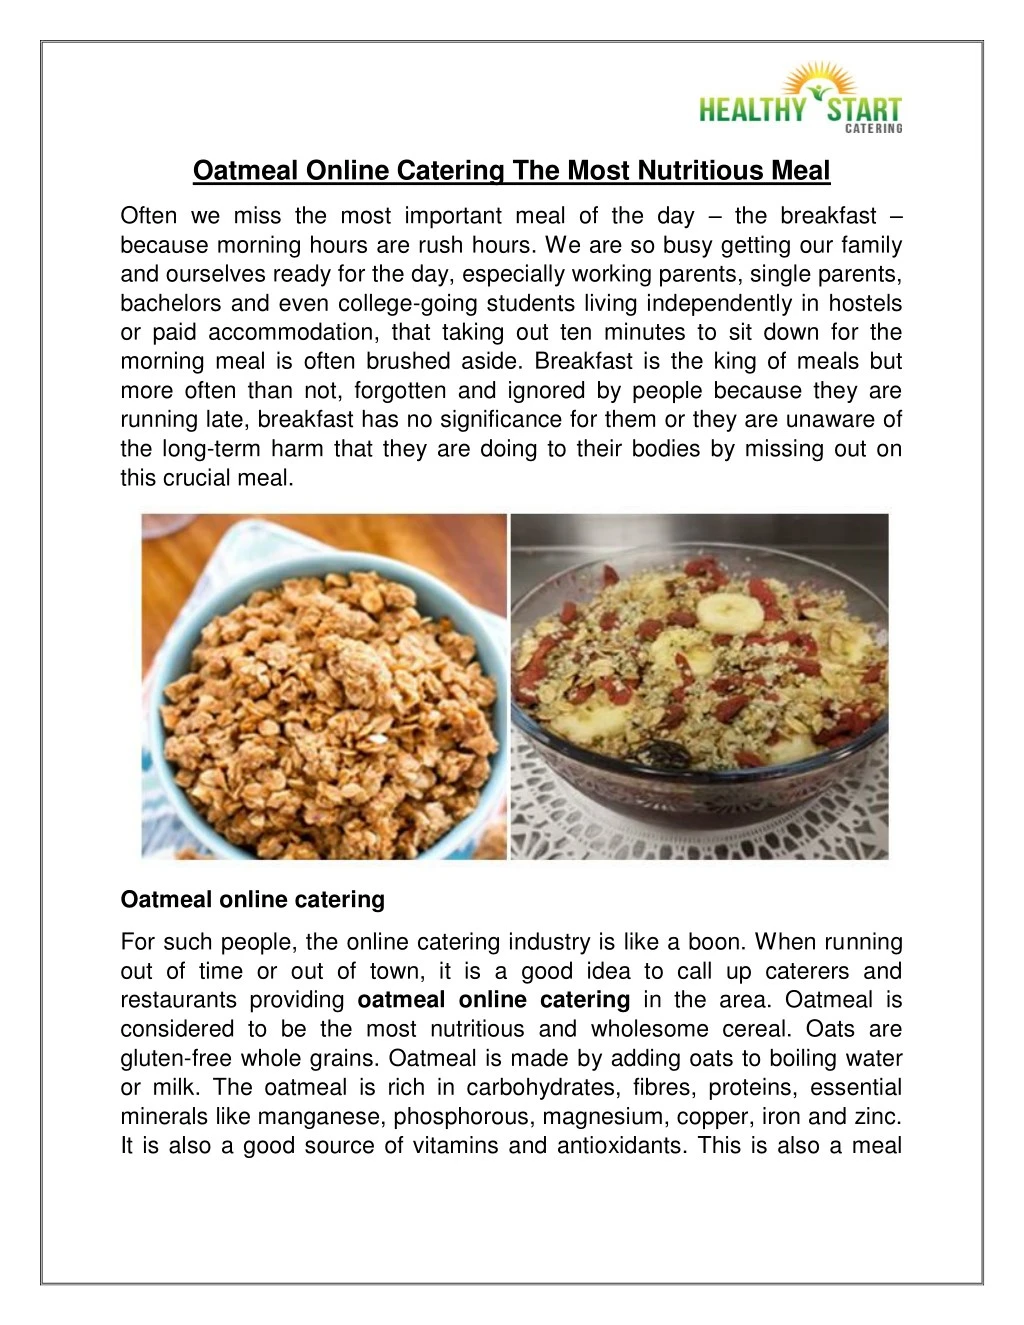 oatmeal online catering the most nutritious meal